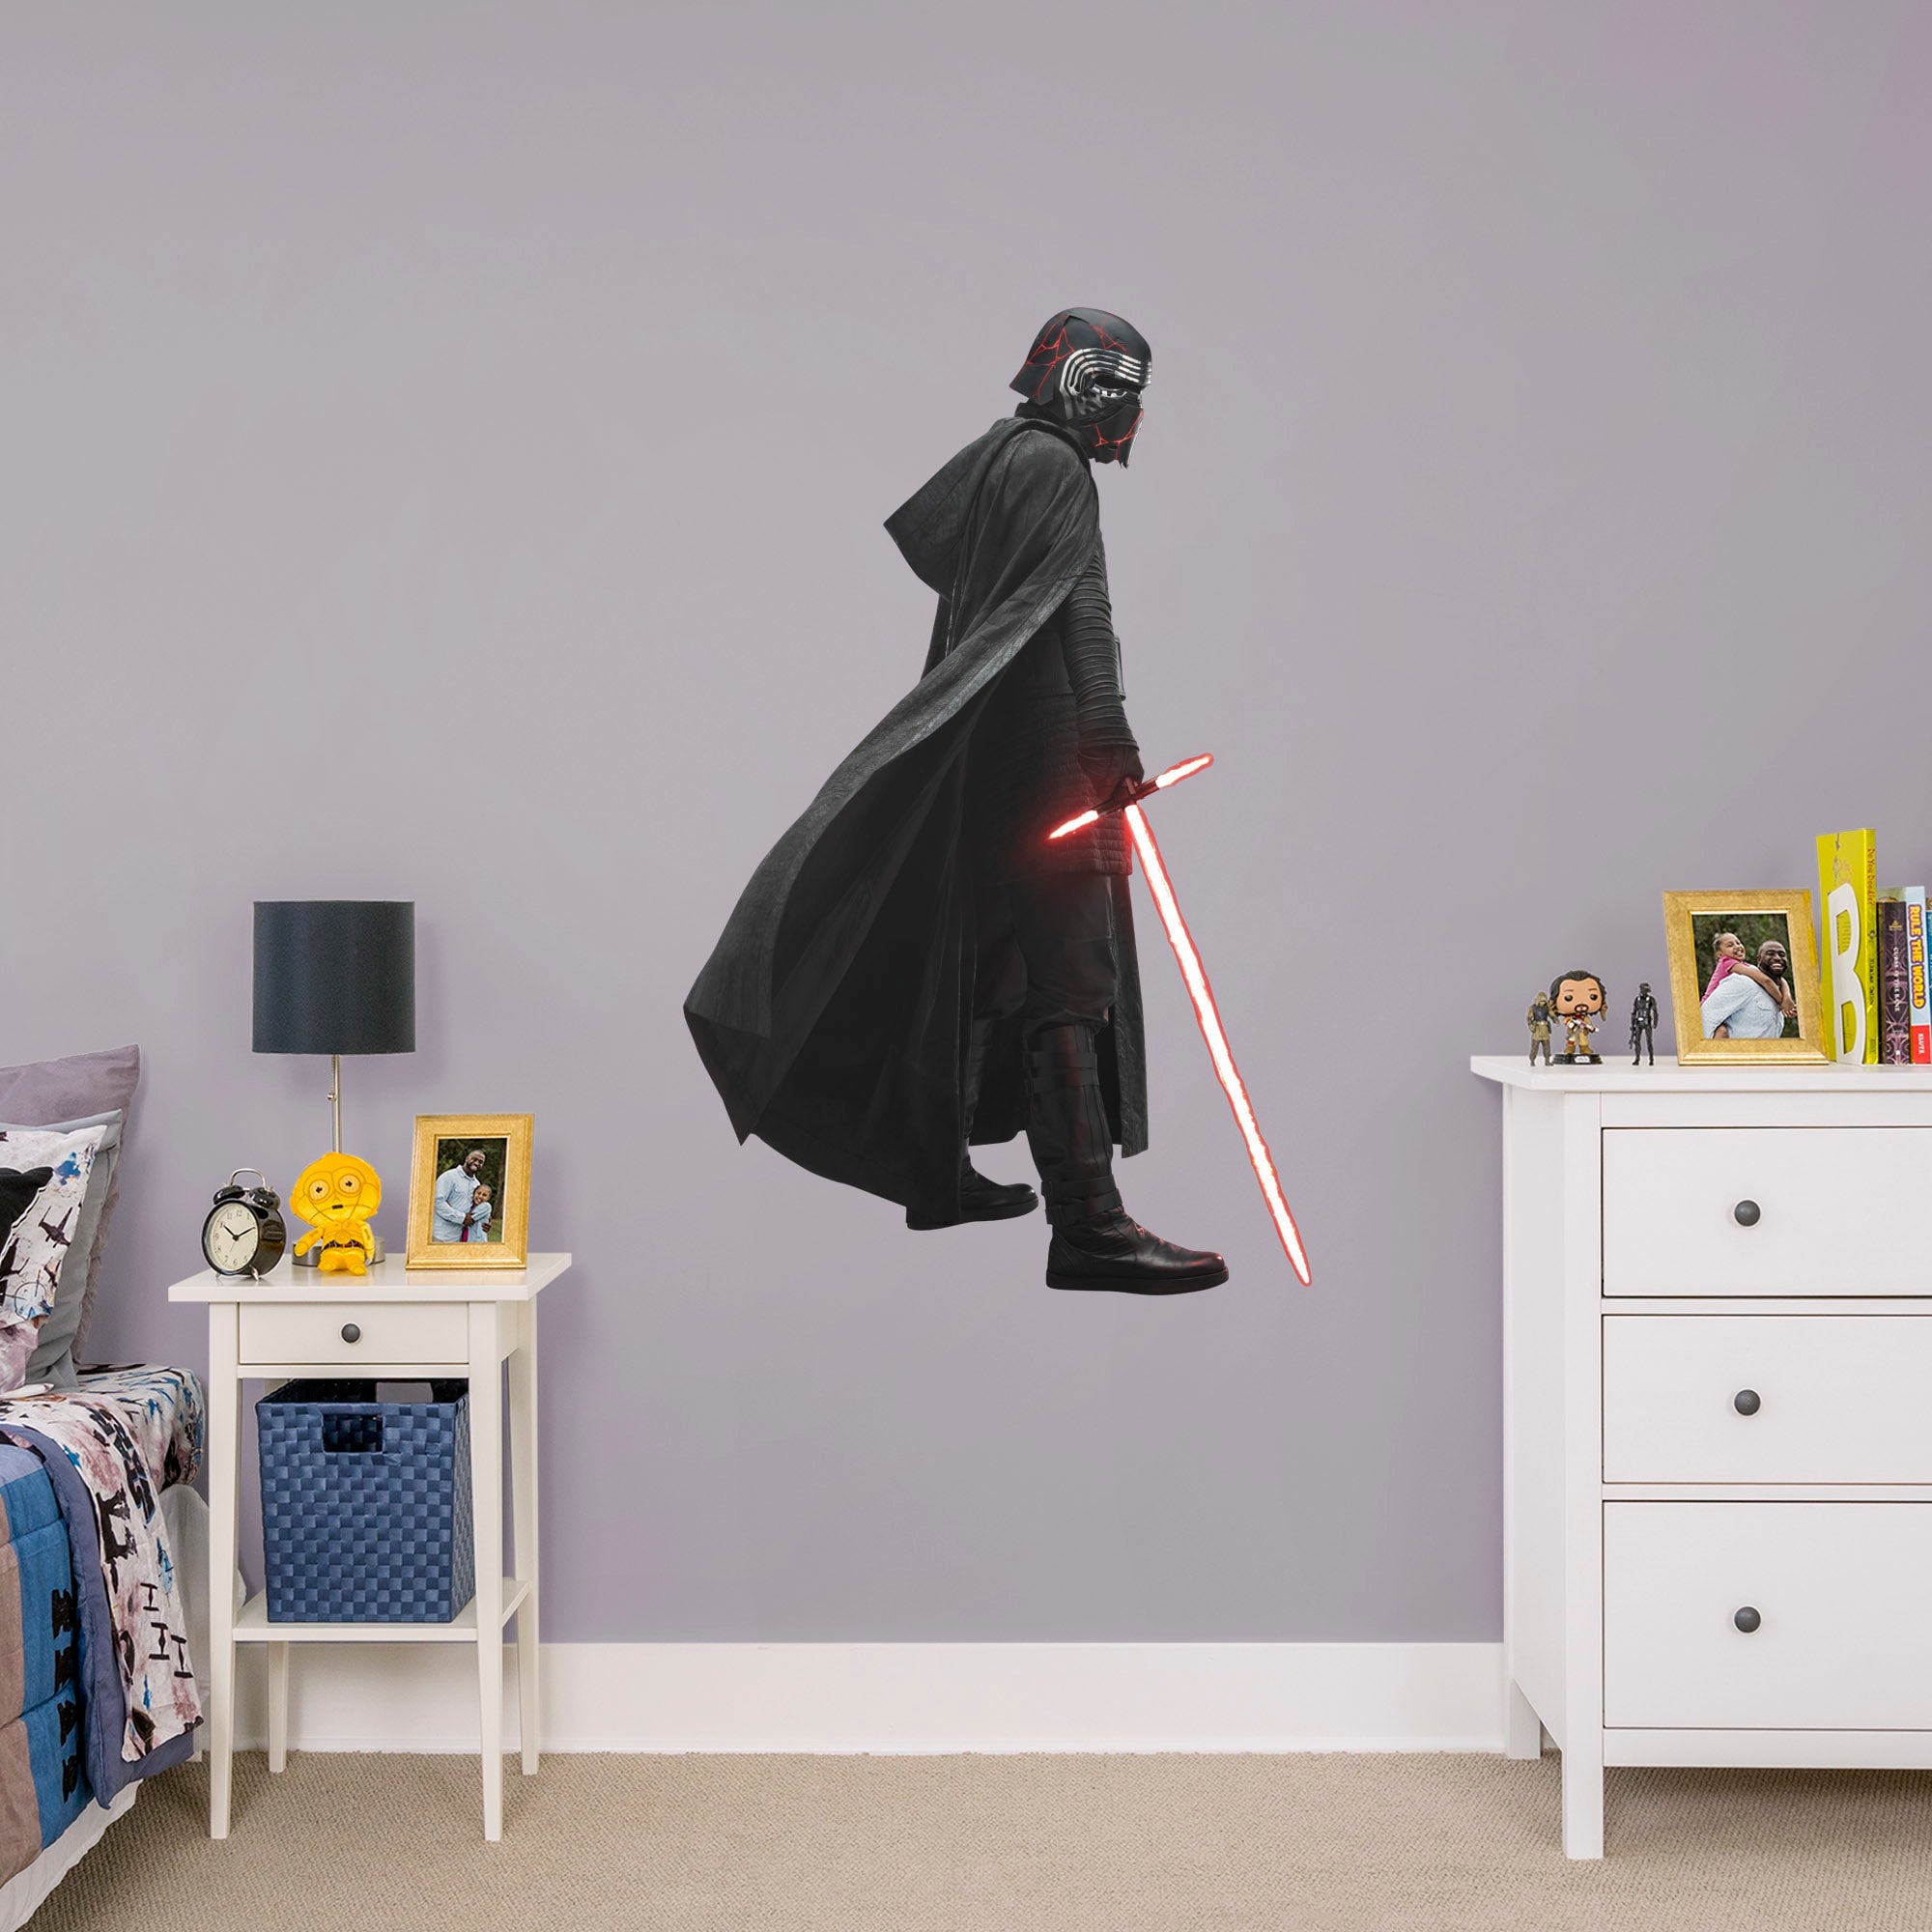 Kylo Ren - Star Wars: The Rise of Skywalker - Officially Licensed Removable Wall Decal Giant Character + 2 Decals (32"W x 51"H)